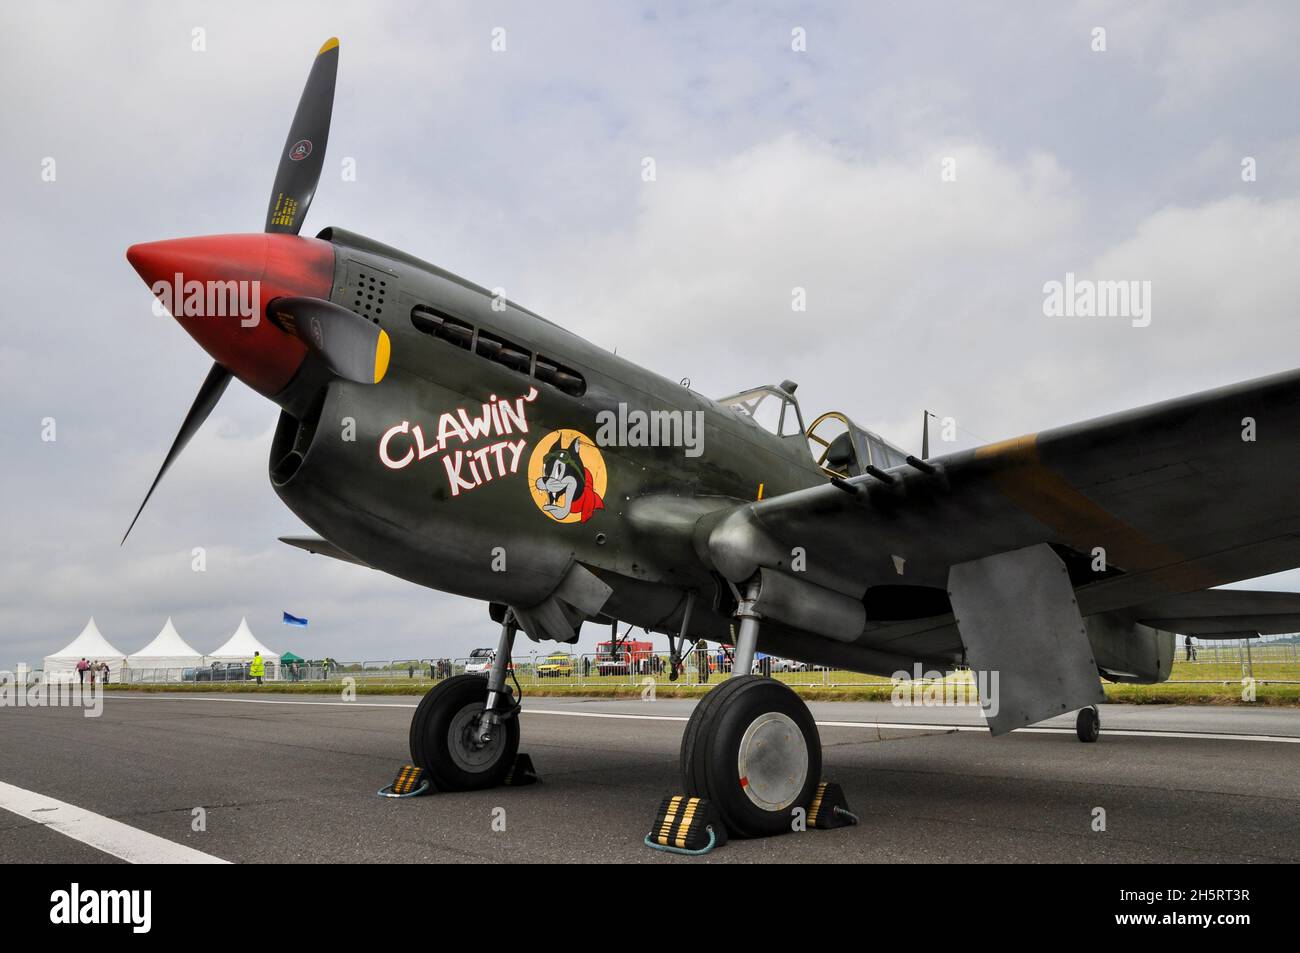 Curtiss P-40 Kittyhawk G-KITT of Hangar 11 at Biggin Hill airshow. Wearing a temporary water washable scheme, after filming Red Tails film. Nose art Stock Photo